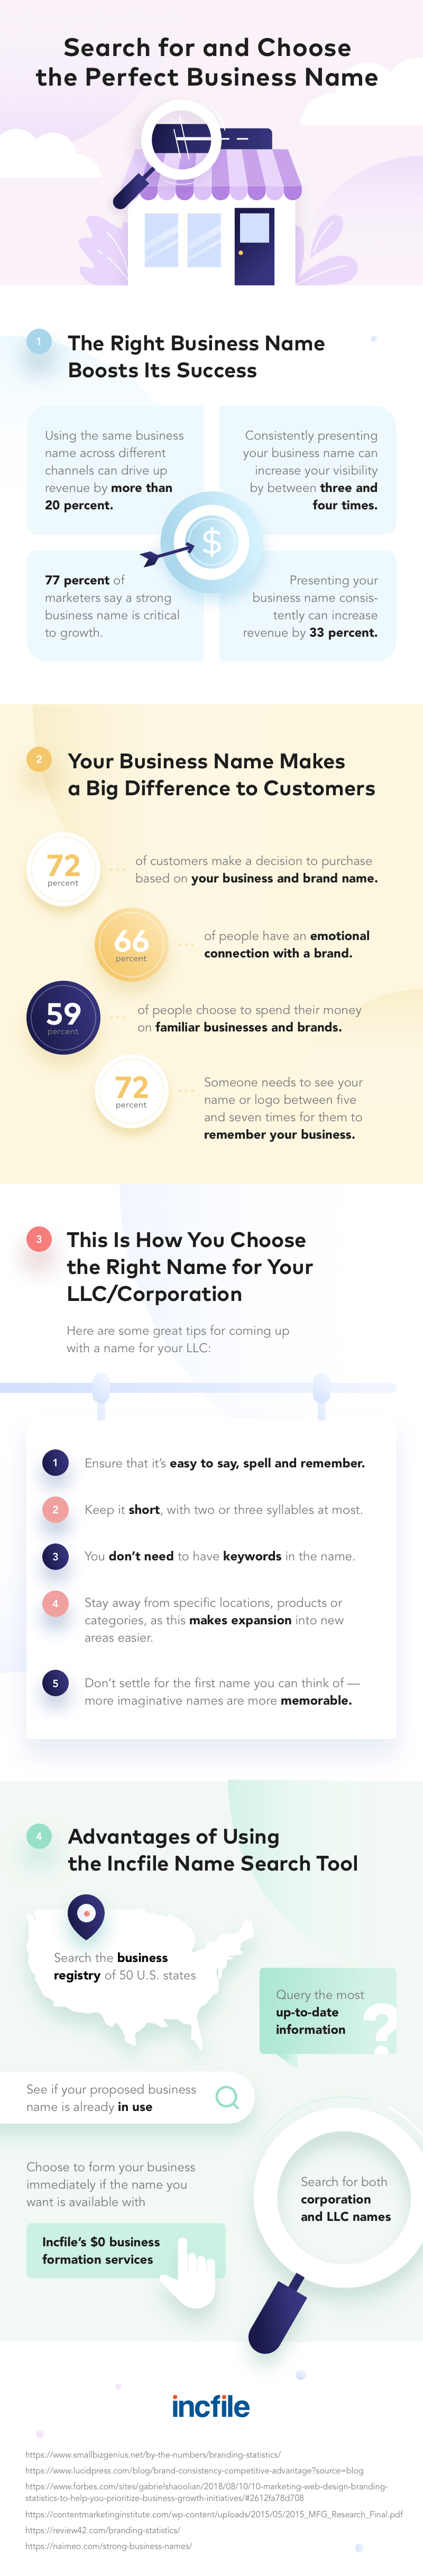 how to choose the best business name